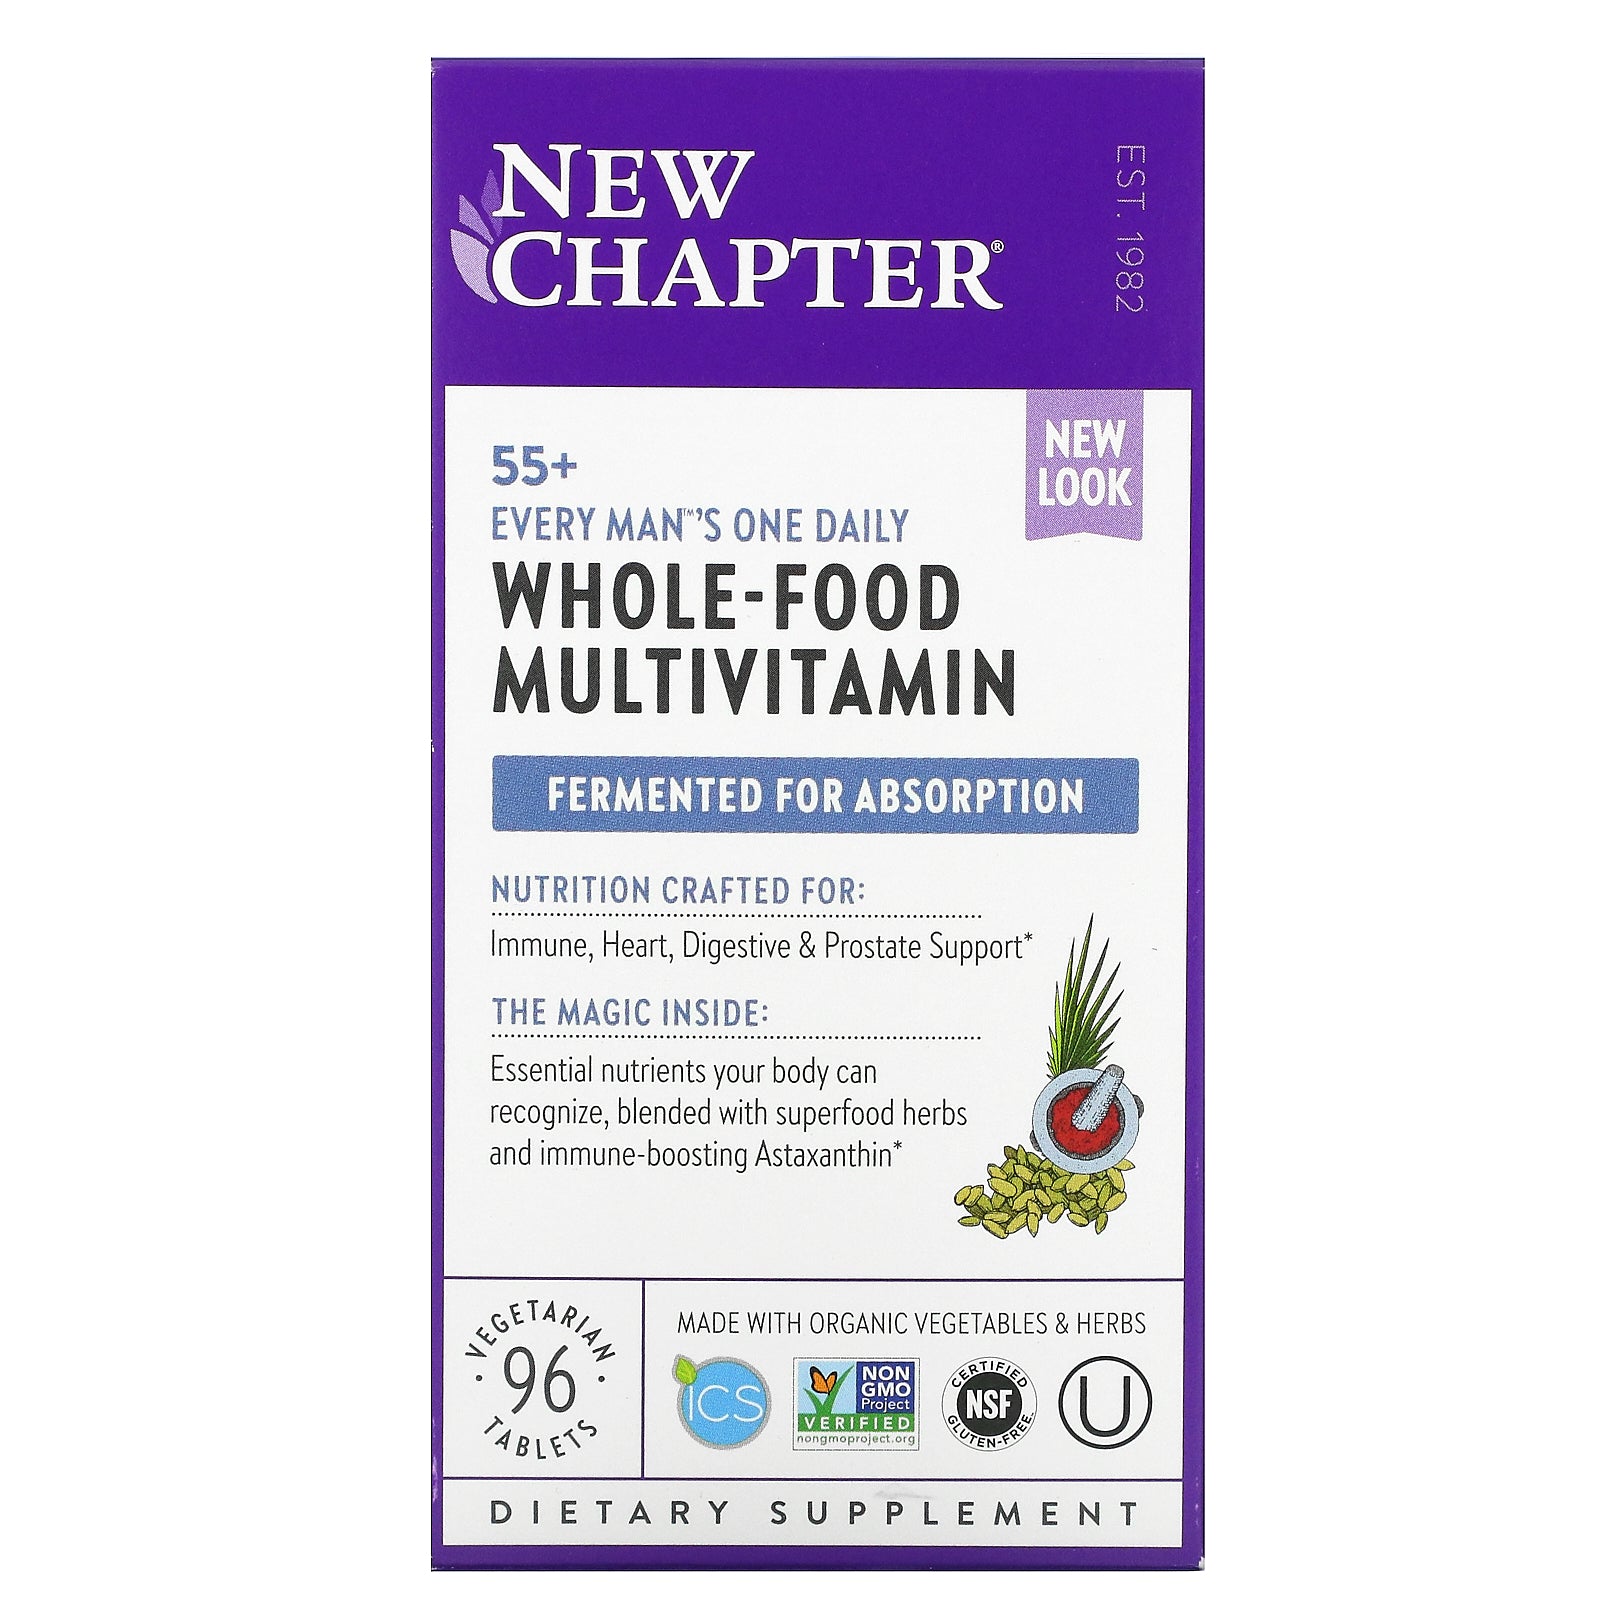 New Chapter, 55+ Every Man's One Daily, Whole-Food Multivitamin, 96 Vegetarian Tablets